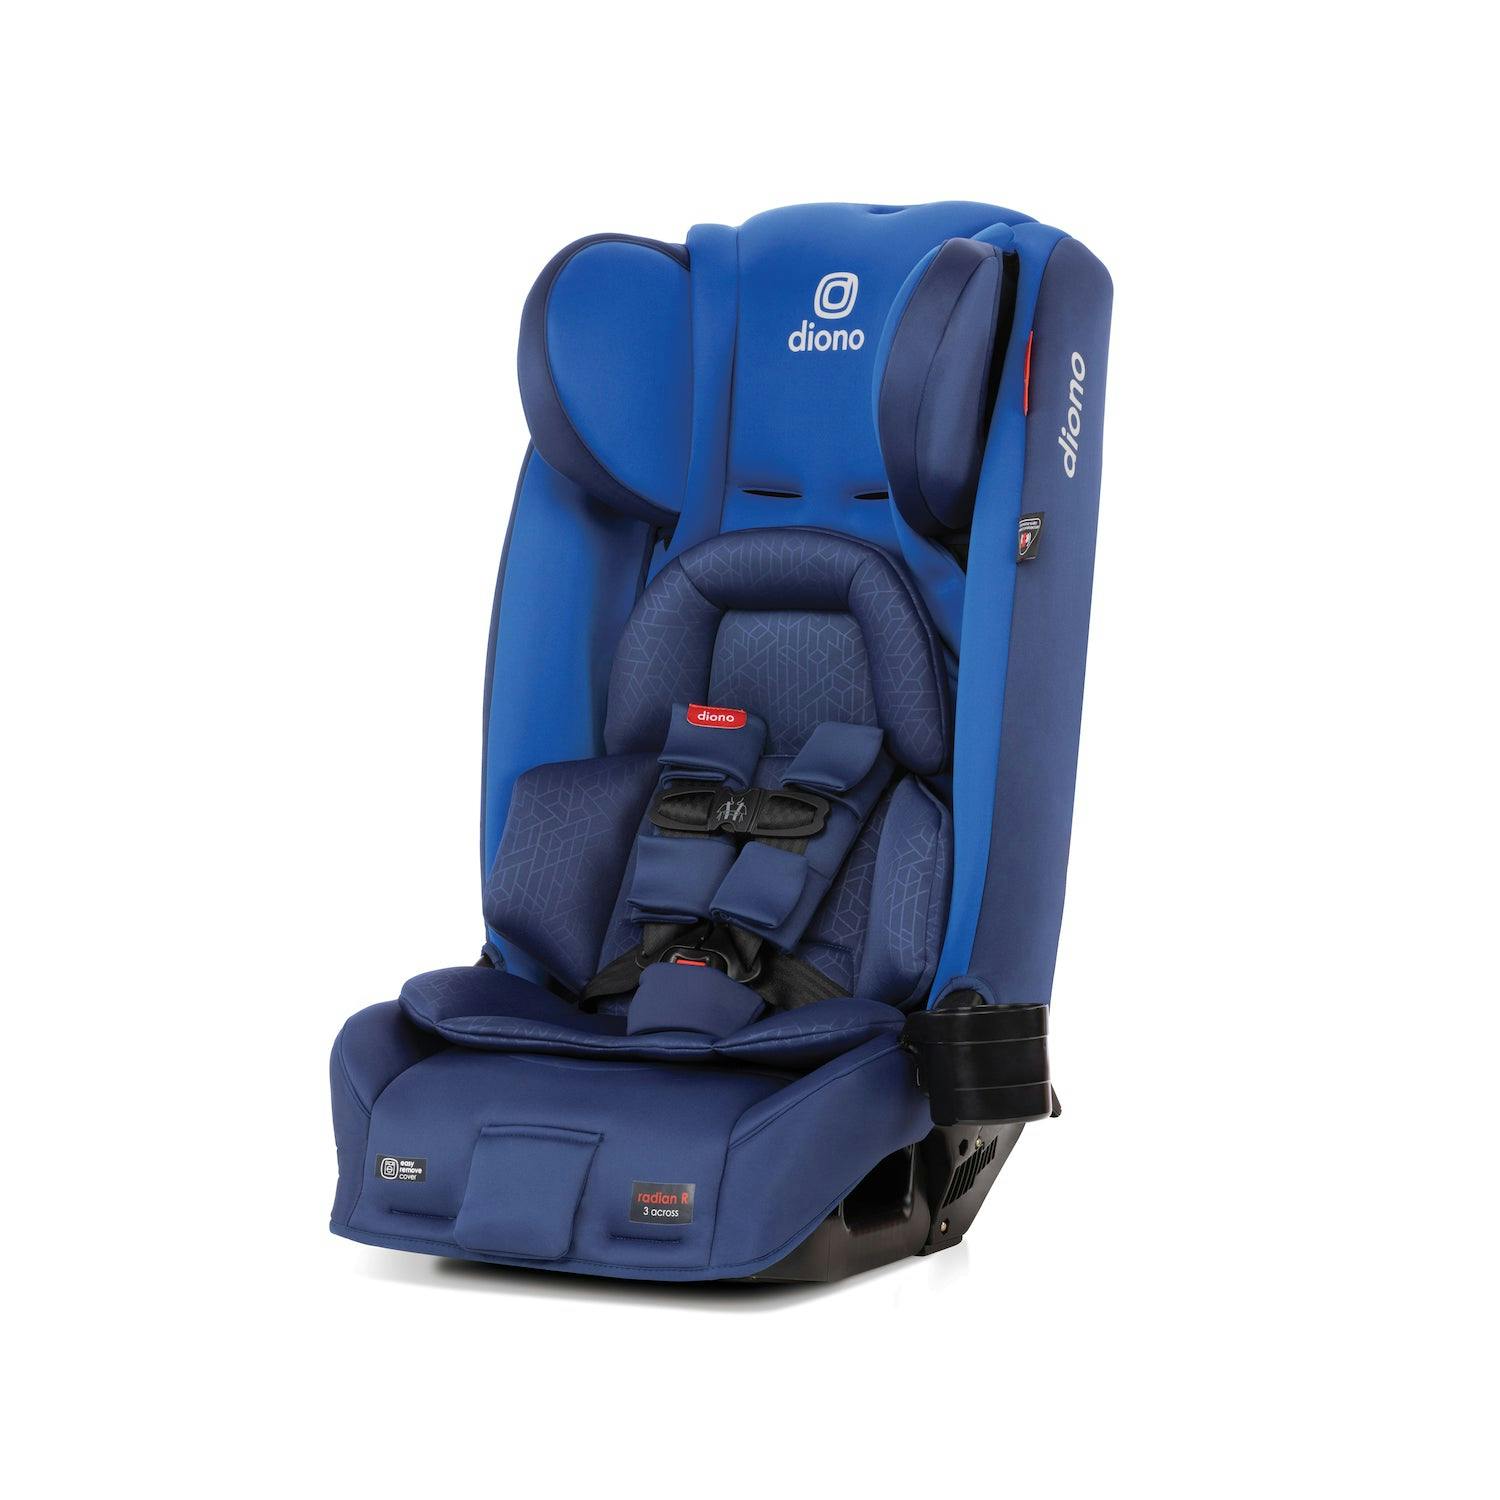 Diono Radian® 3RXT Latch All-in-One Convertible Car Seat